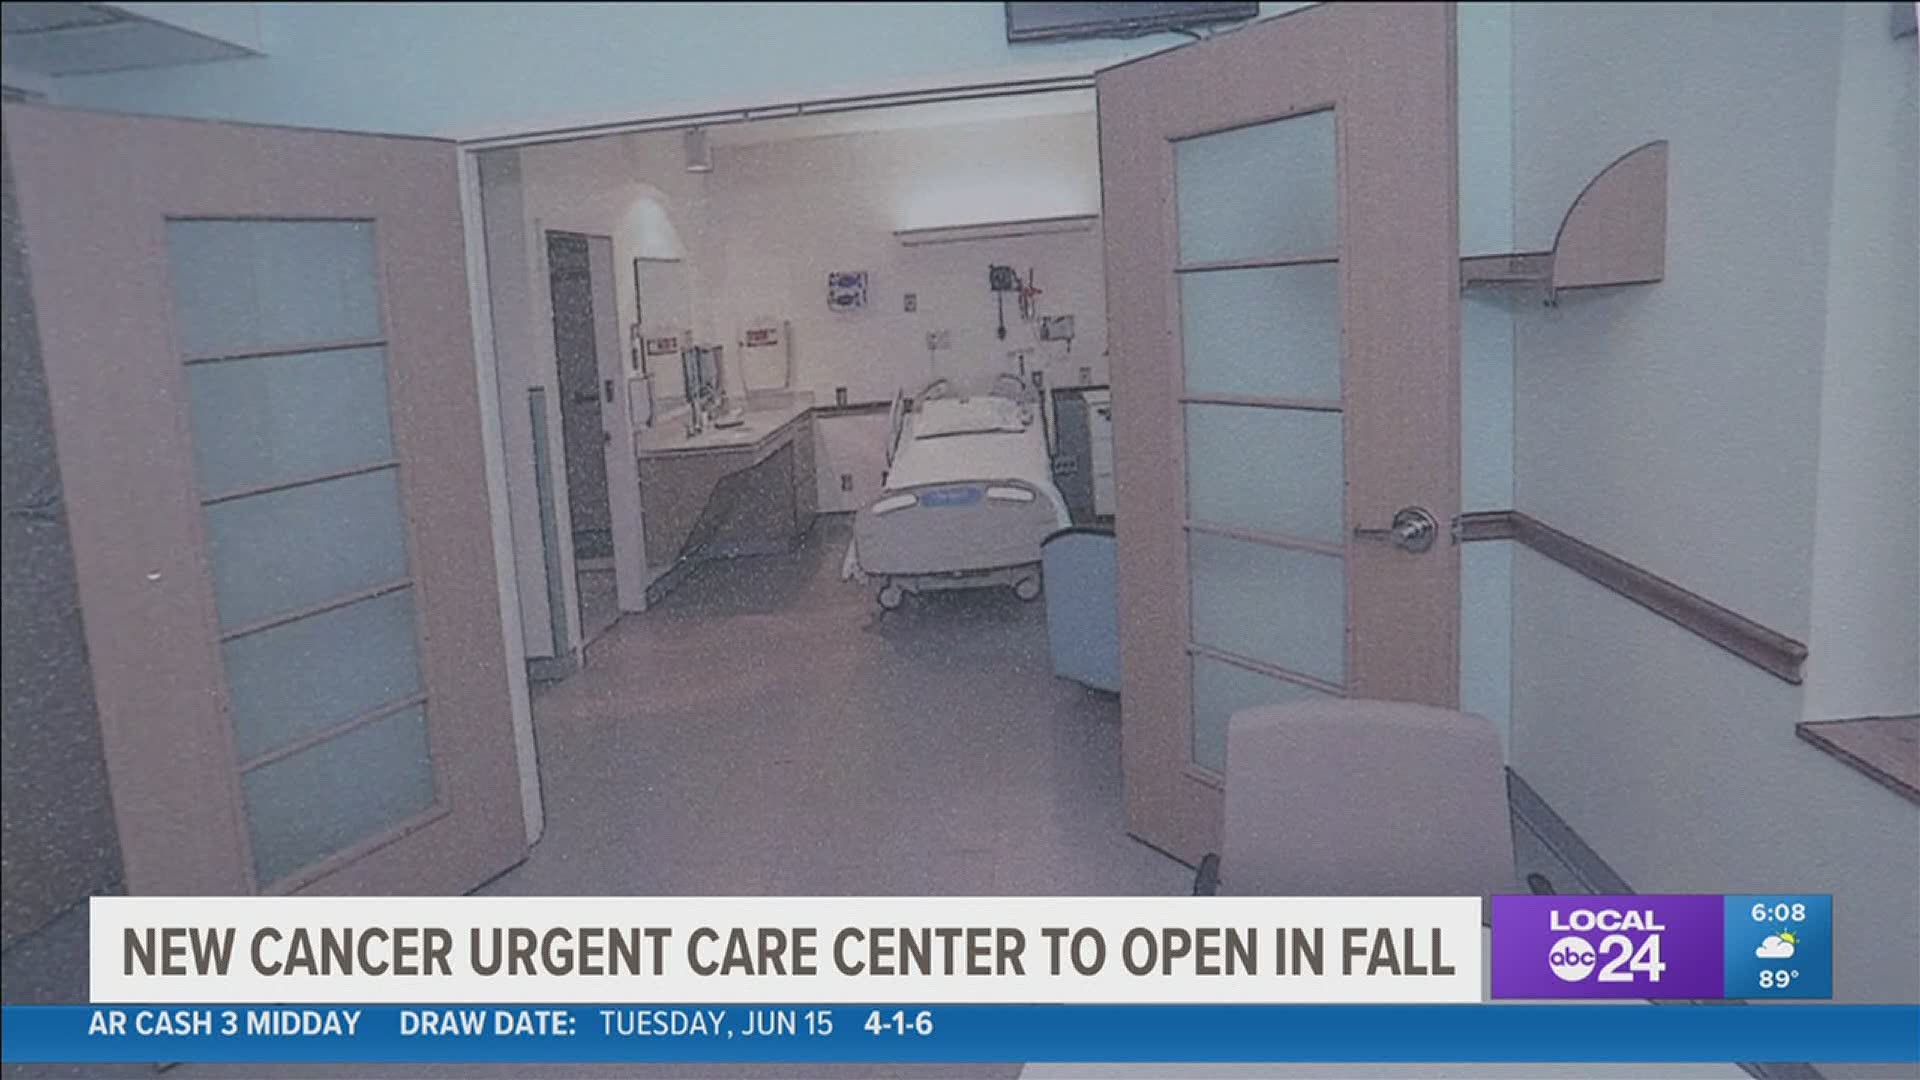 St. Francis Healthcare and West Cancer Center are partnering to build a 5-thousand square foot center to help cancer patients who need urgent care.